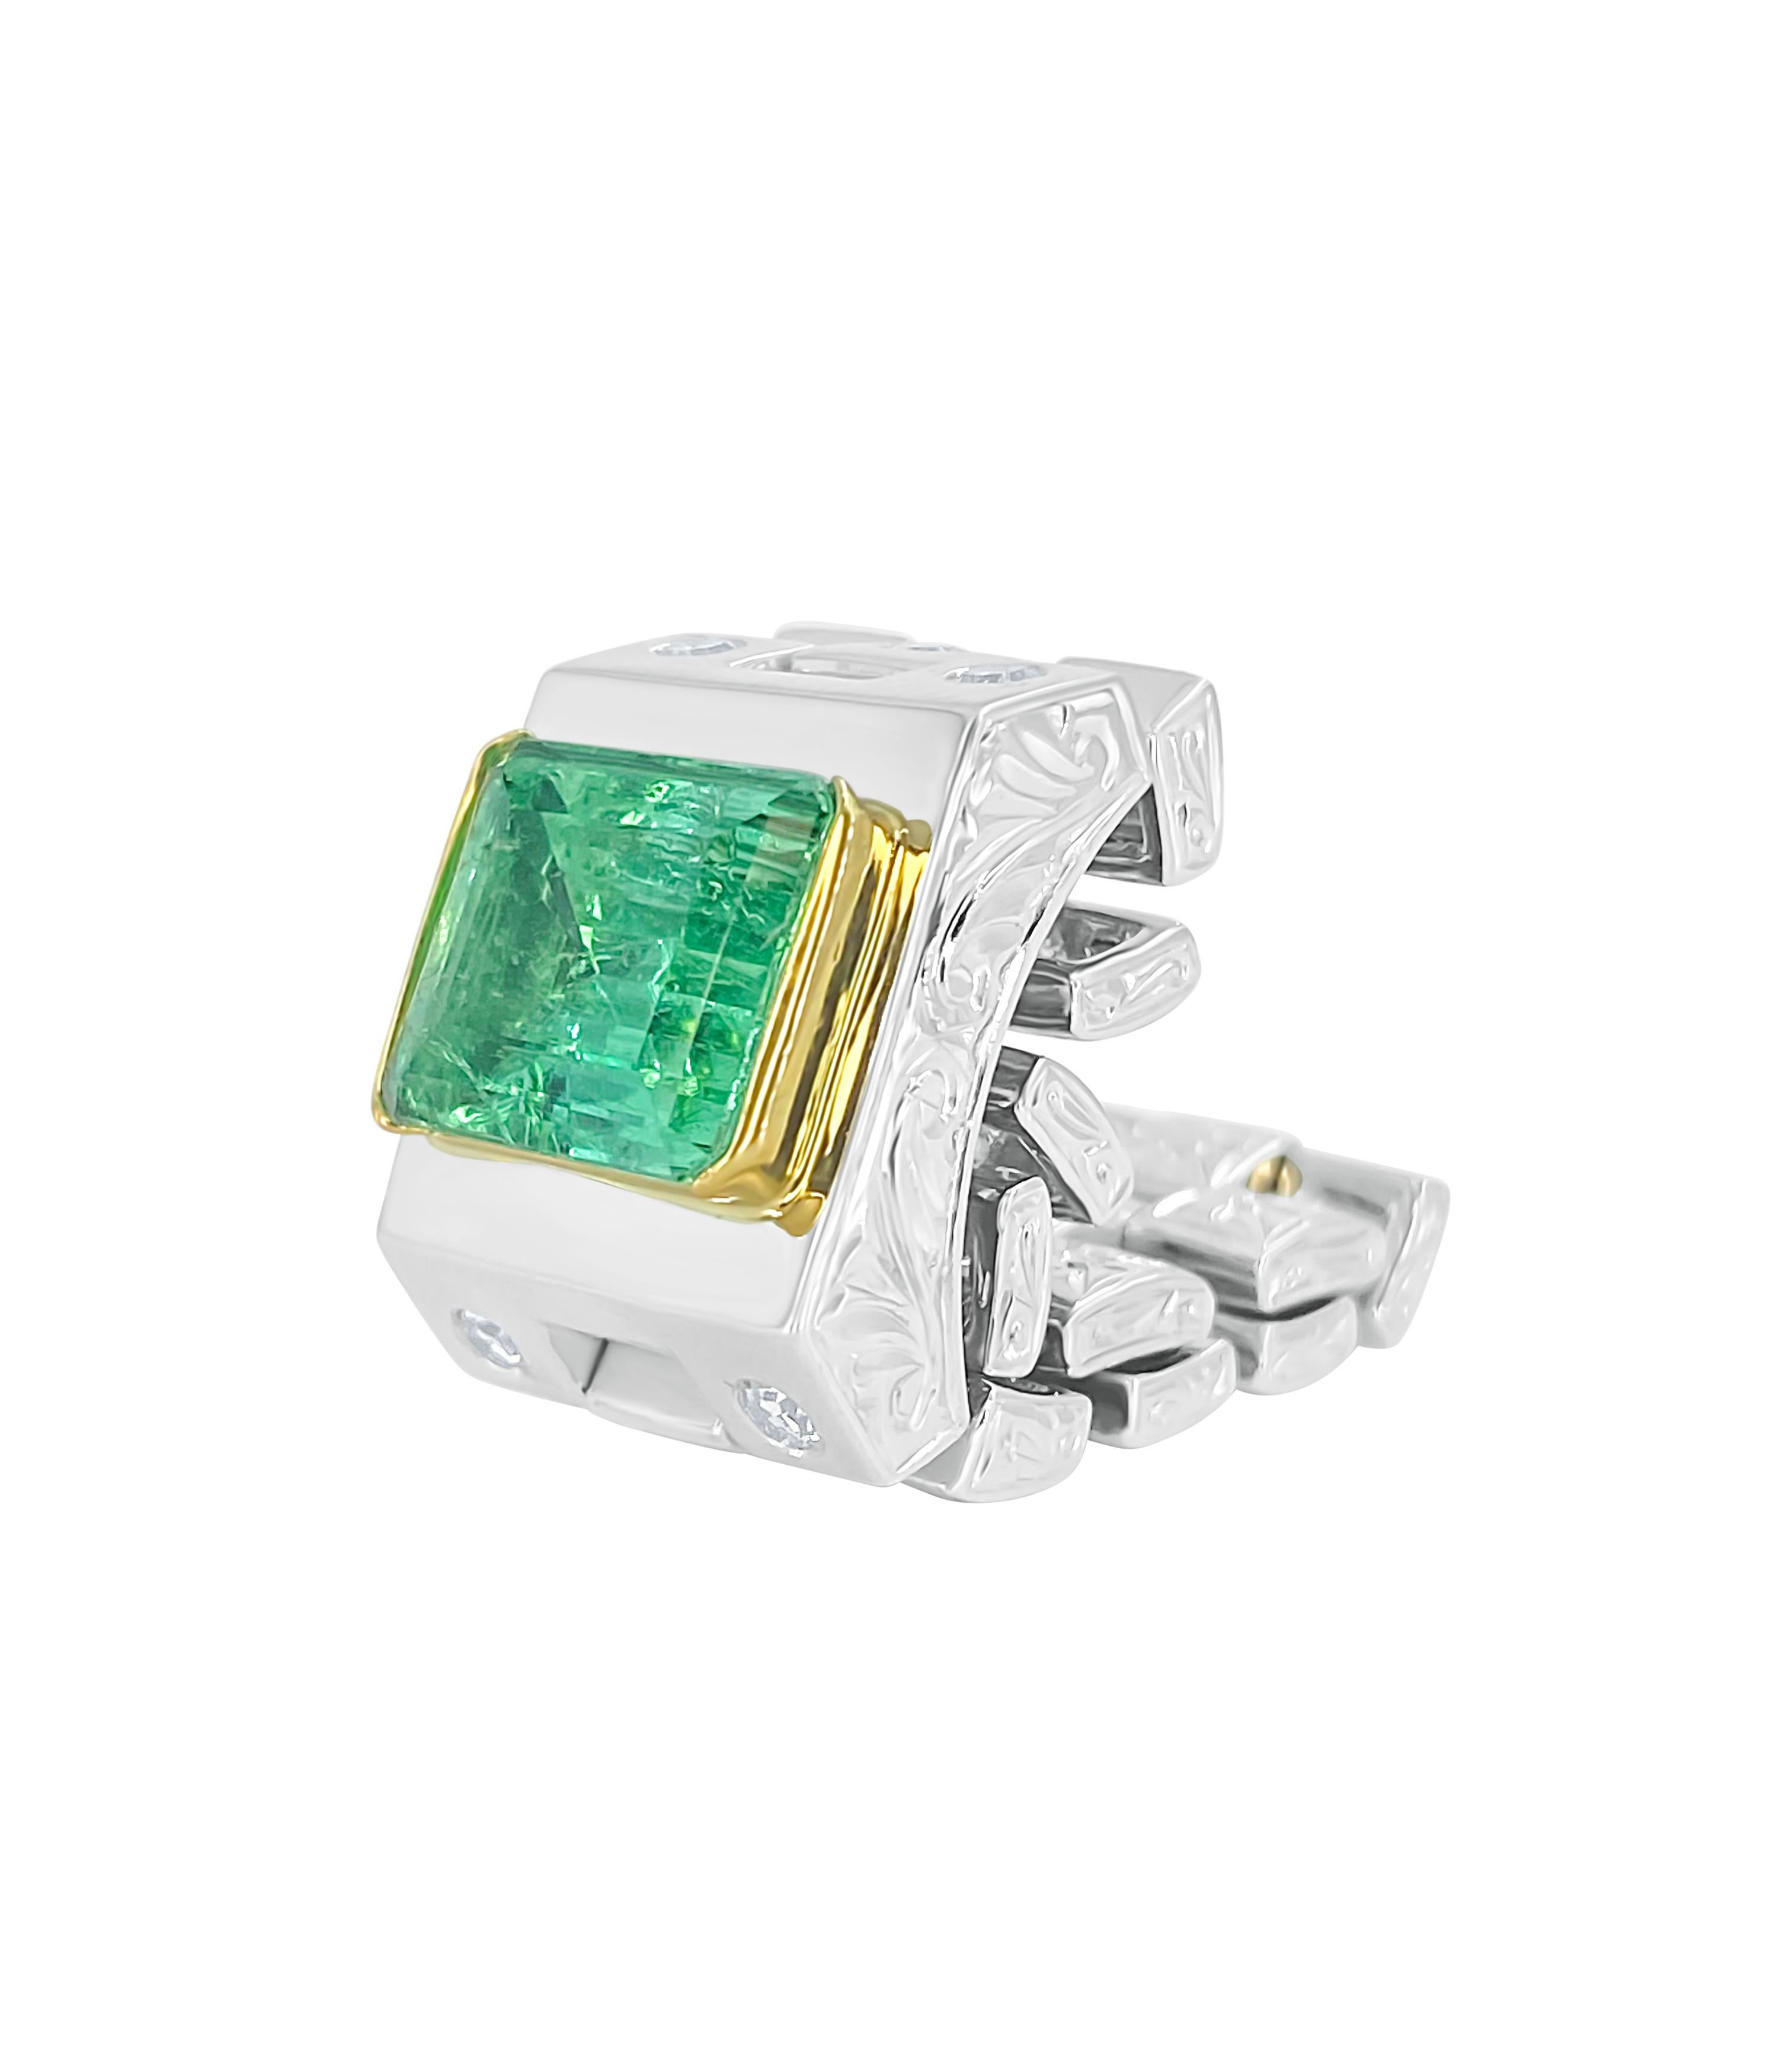 Available in size 7.5 and size 9

GRS certified natural Colombian Emerald mounted in an 18k gold and platinum link ring setting. This legendary Emerald is of Colombian origin and has the lowest degree of treatment (insignificant)*. The Emerald has